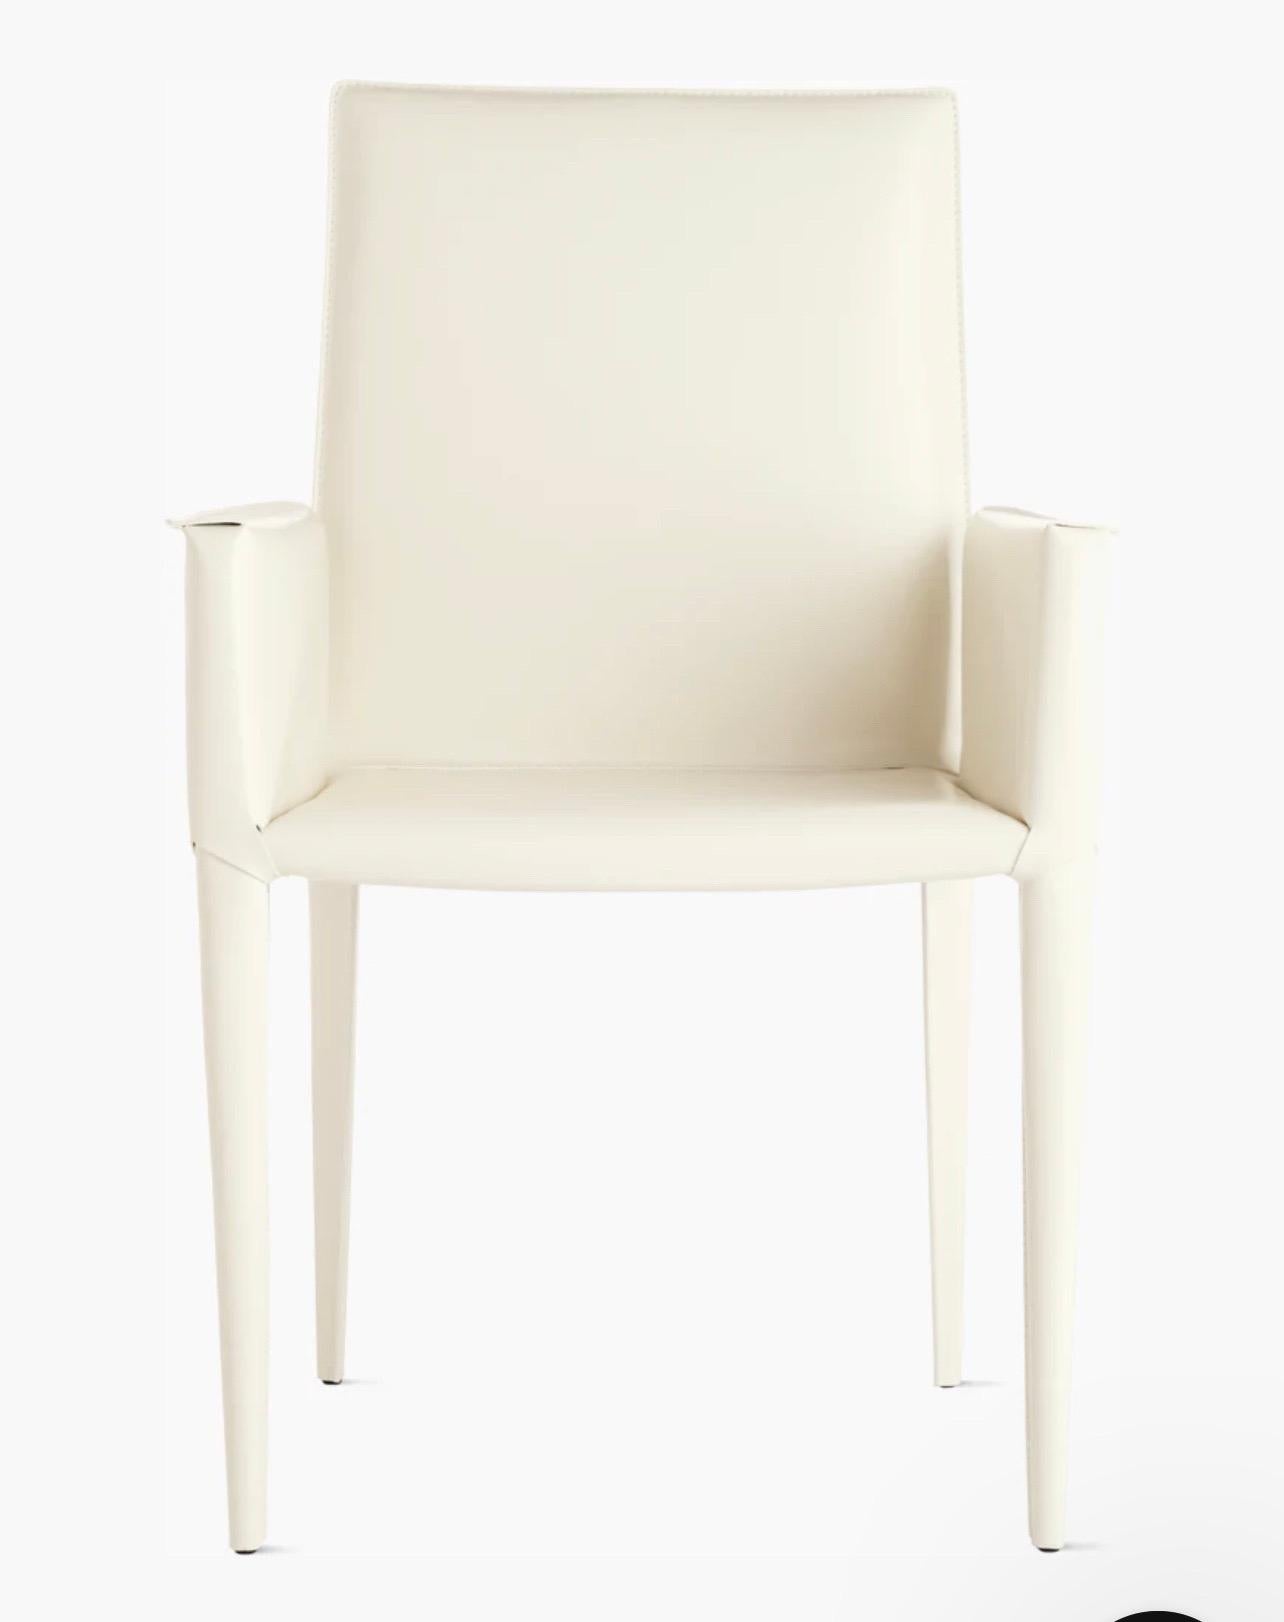 Italian Postmodern Set of 4 Chairs in White Leather Bottega by Frag, Italy